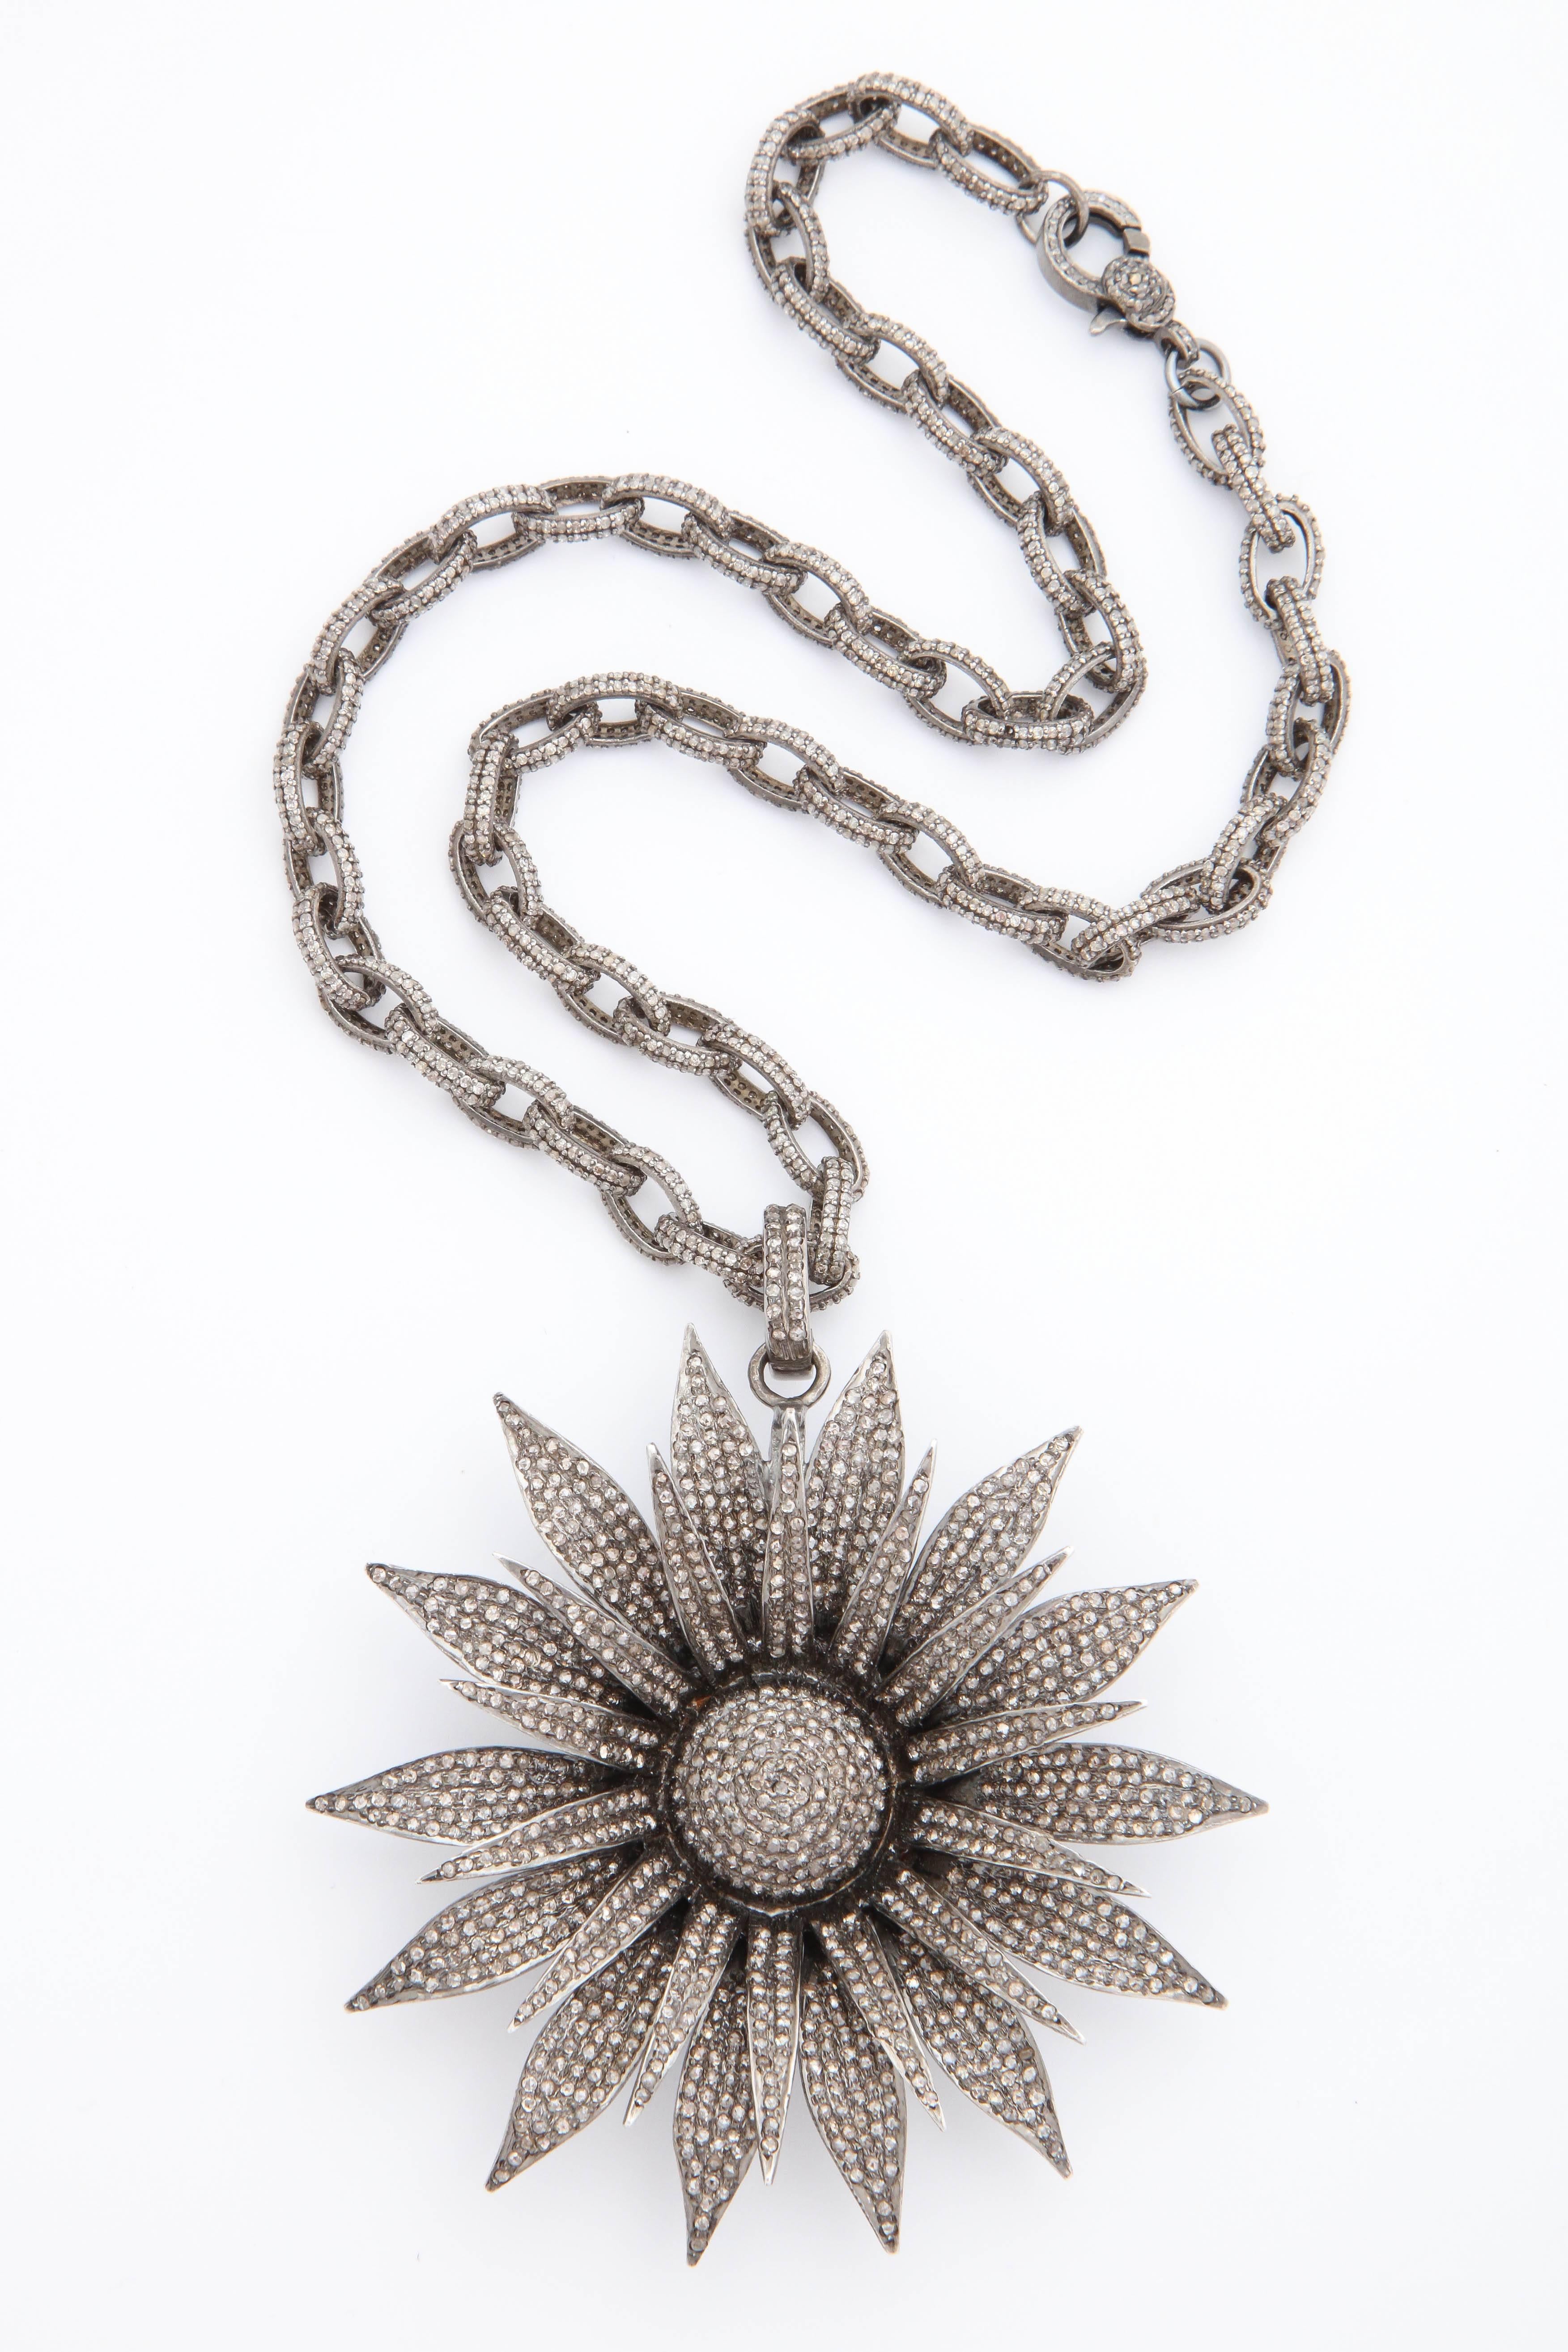 A necklace composed of a rhodium plated sterling silver chain set with approximately 5.65cys of diamonds and a rhodium plated sterling silver and diamond daisy pendant set with approximately 10.50cts of diamonds.
Length of chain: 16.00 inches
Width